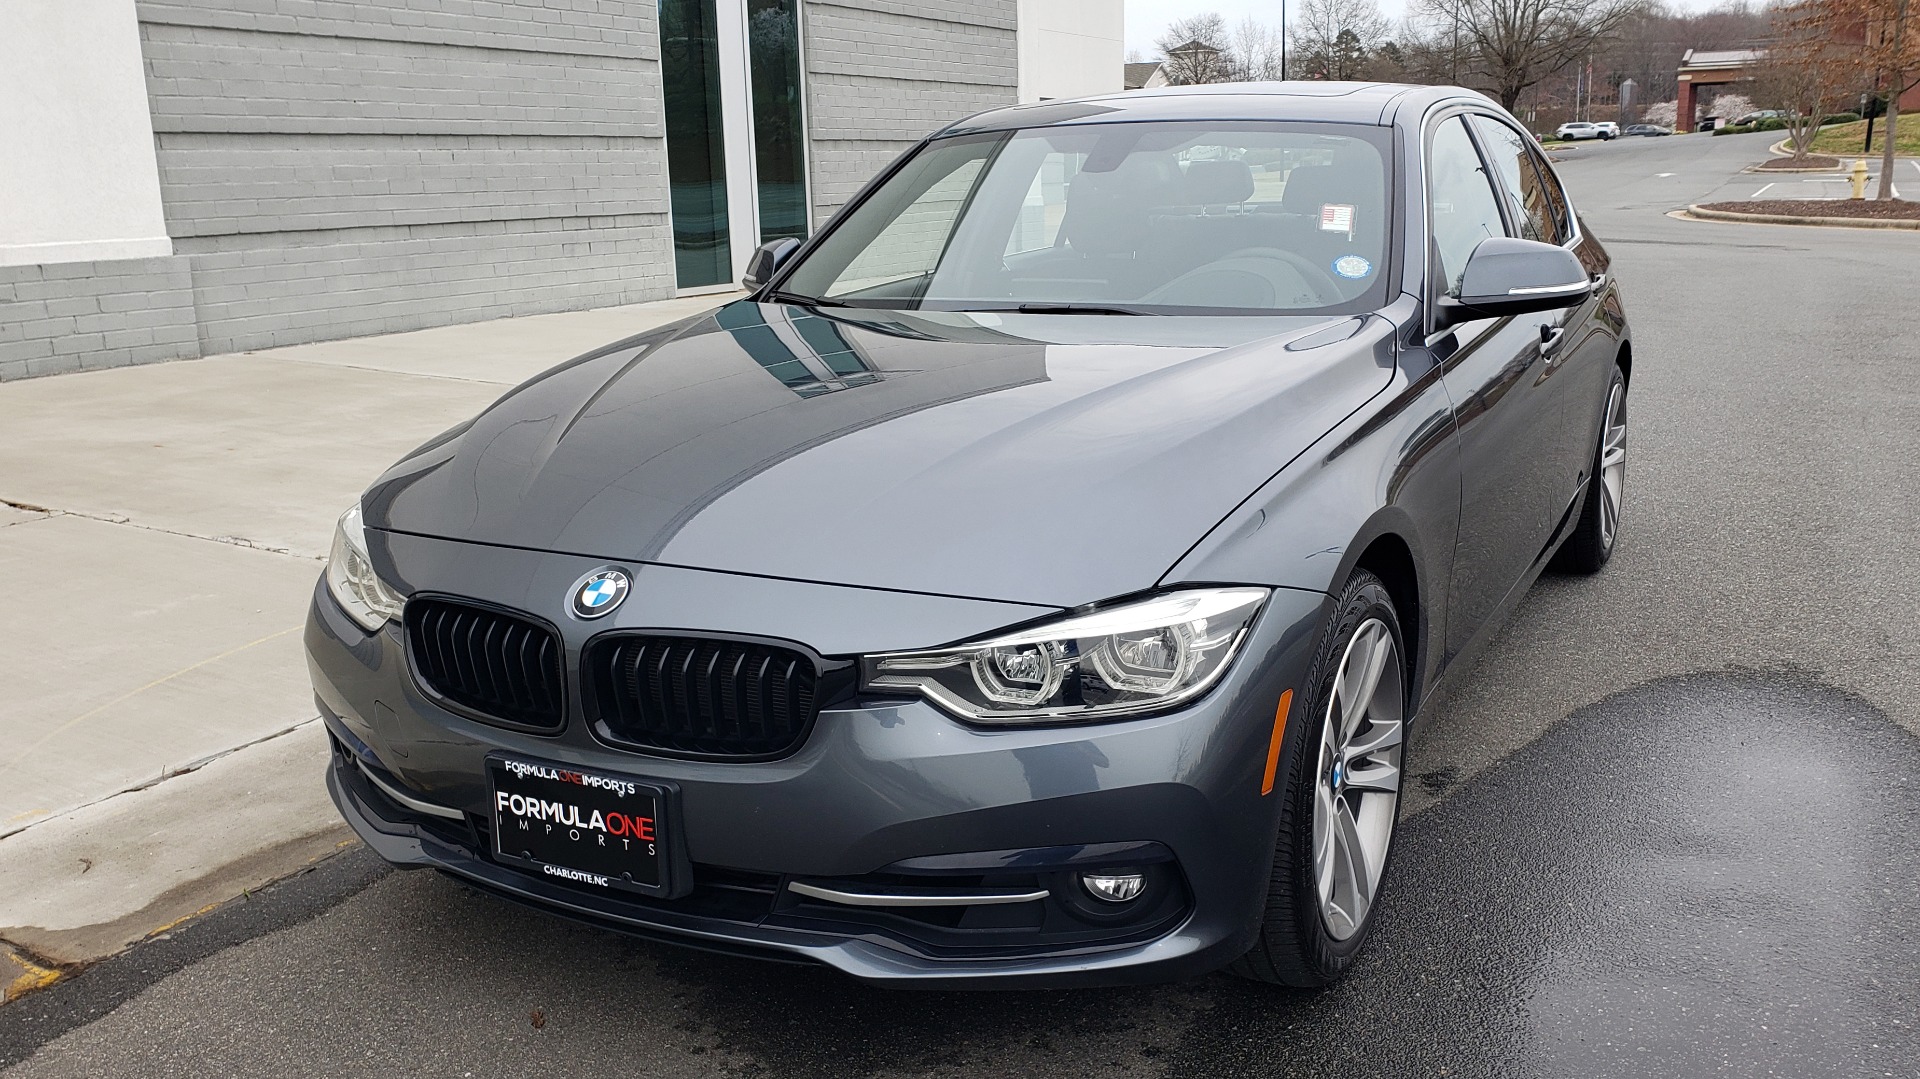 Used 2018 BMW 3 SERIES 330I XDRIVE PREMIUM / CONV PKG NAV / BLIND SPOT / HTD STS / REARVIEW for sale Sold at Formula Imports in Charlotte NC 28227 6